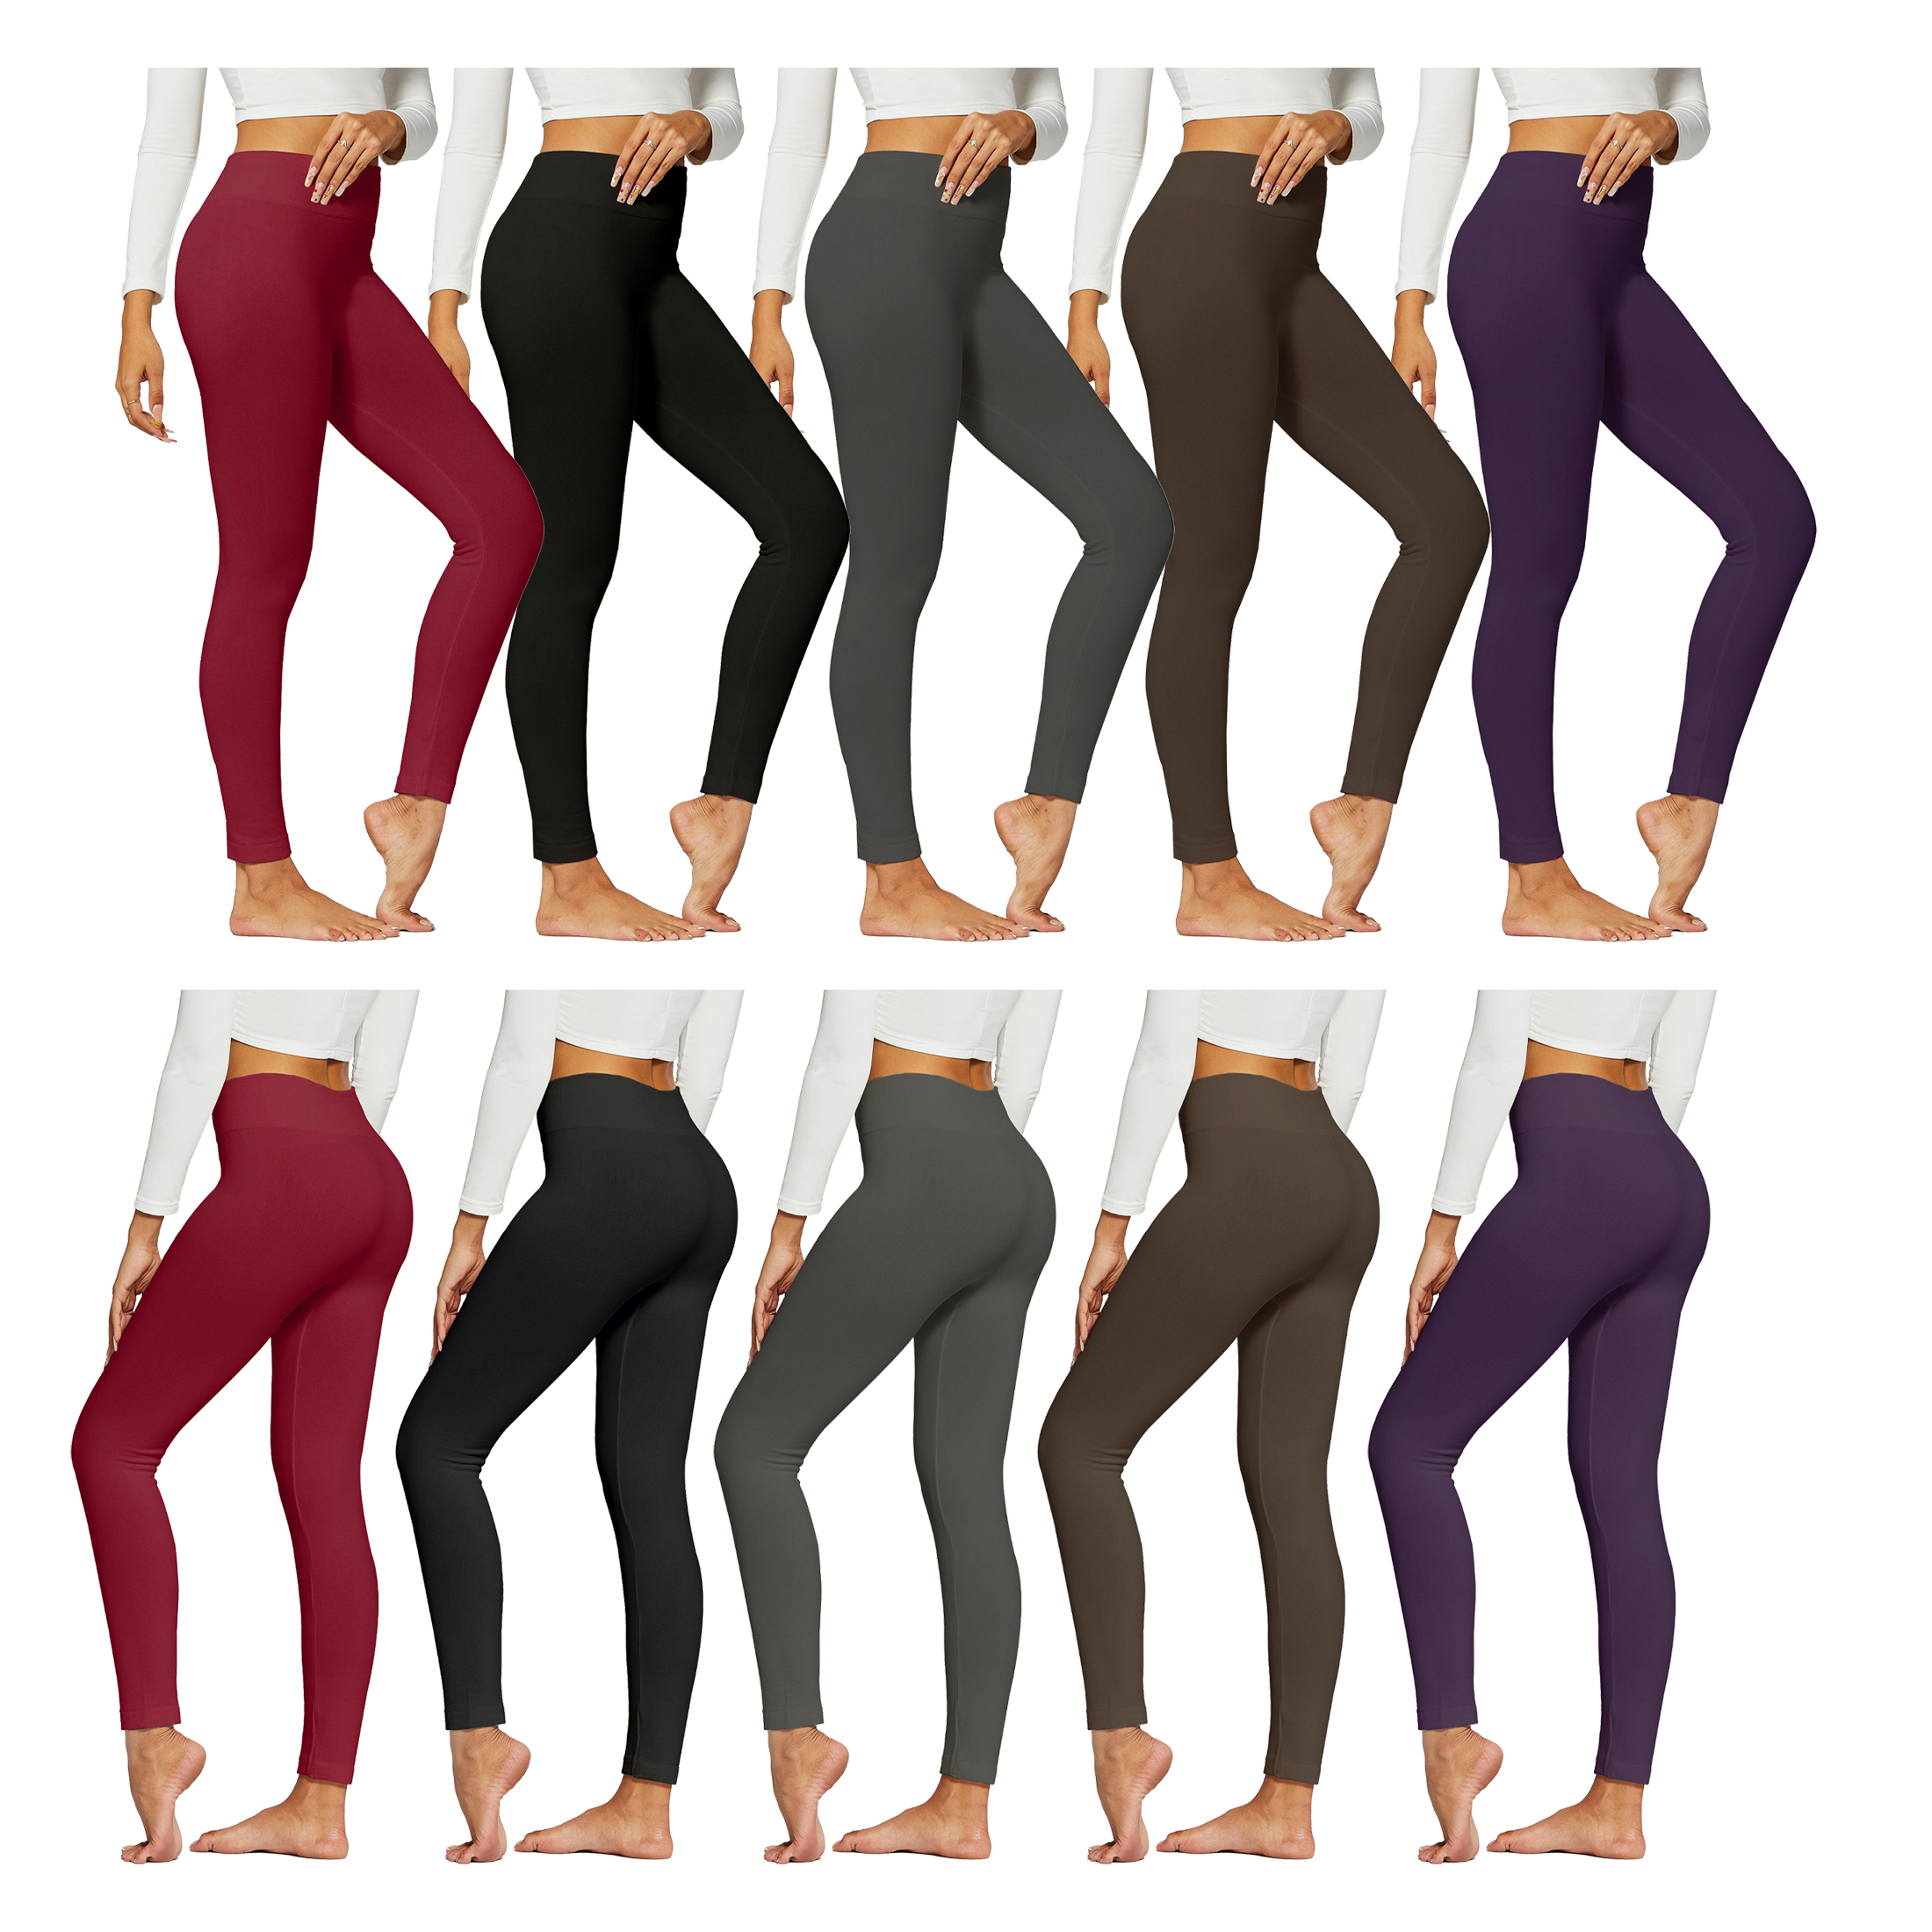 3-Pack:Women's Premium Quality High-Waist Fleece-Lined Leggings (Plus Size Available) - Black, Grey & Red, Small/Medium